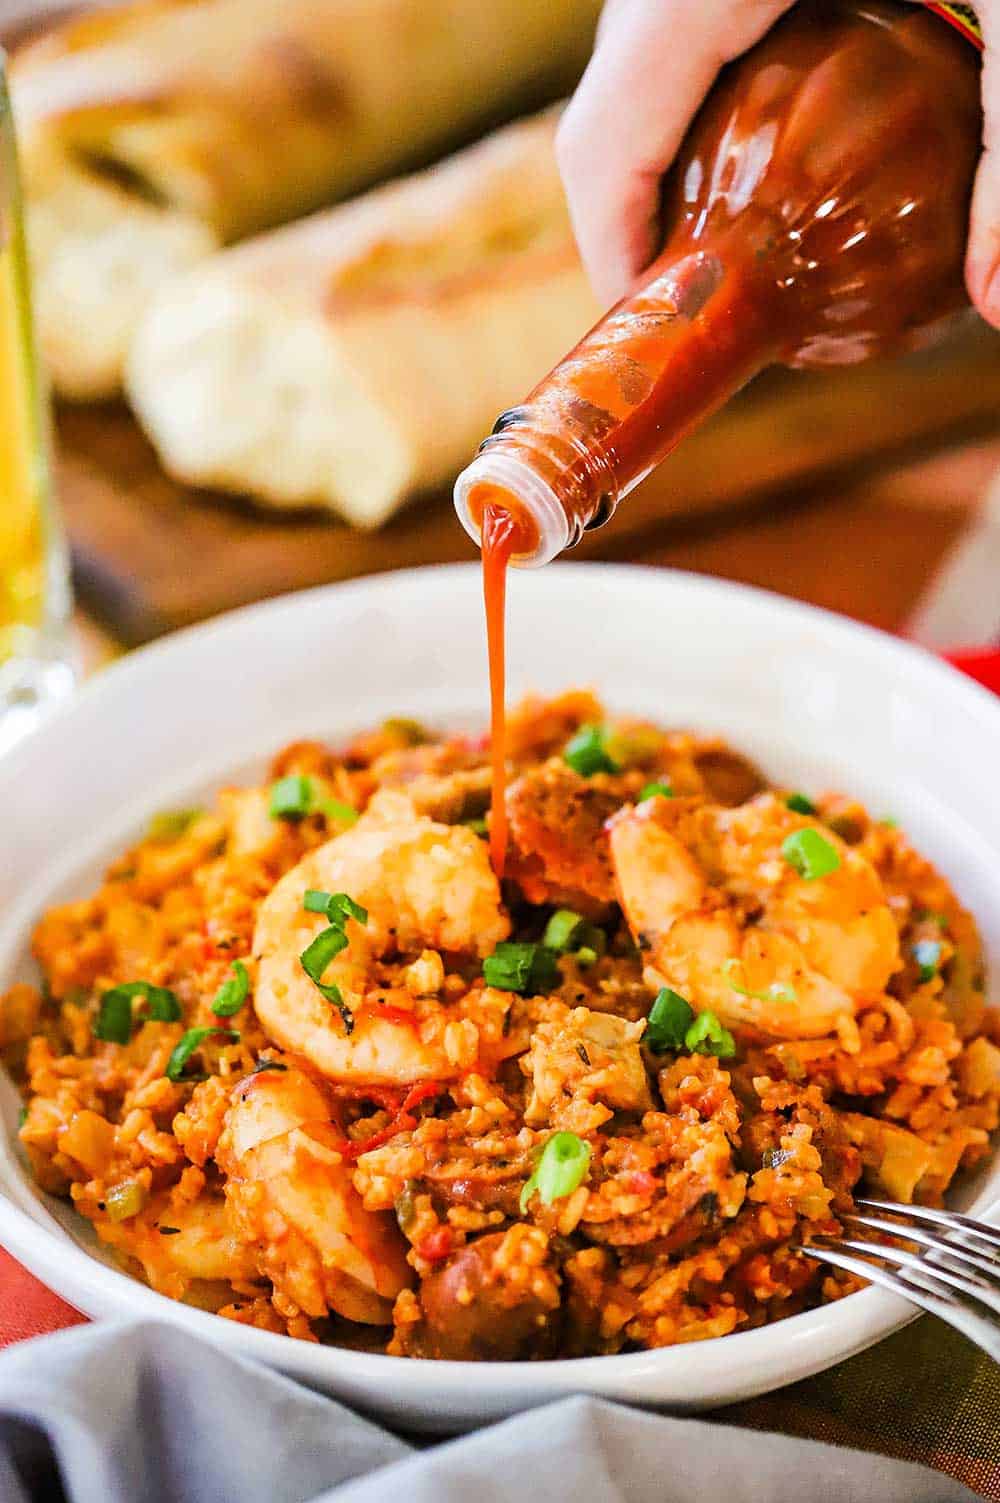 A person pouring hot sauce from a bottle onto a helping of jambalaya in a white bowl next to pieces of French bread.